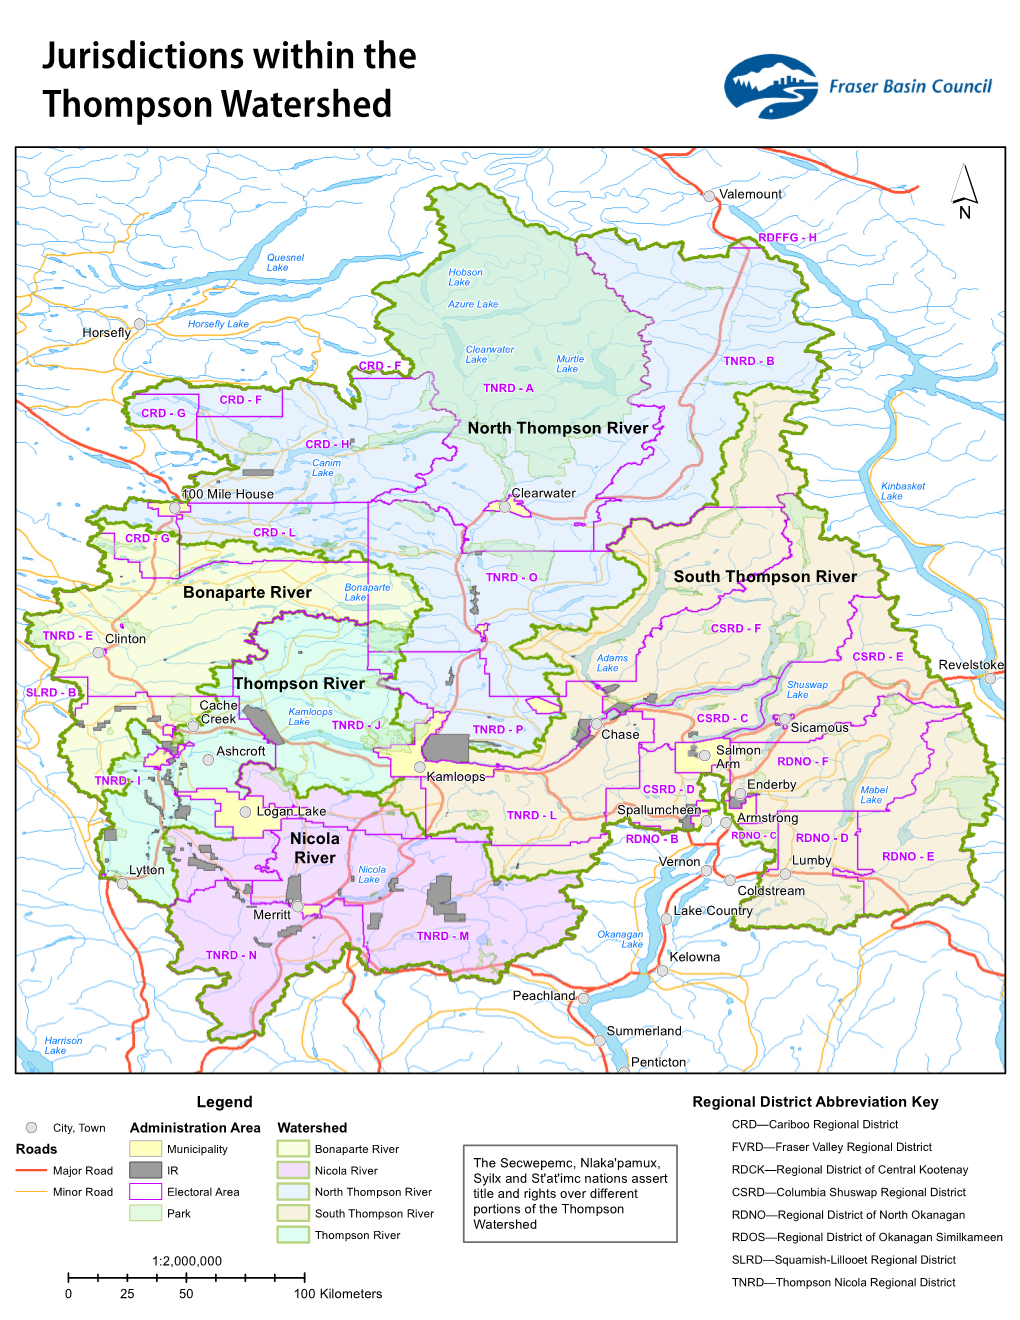 Jurisdictions Within the Thompson Watershed